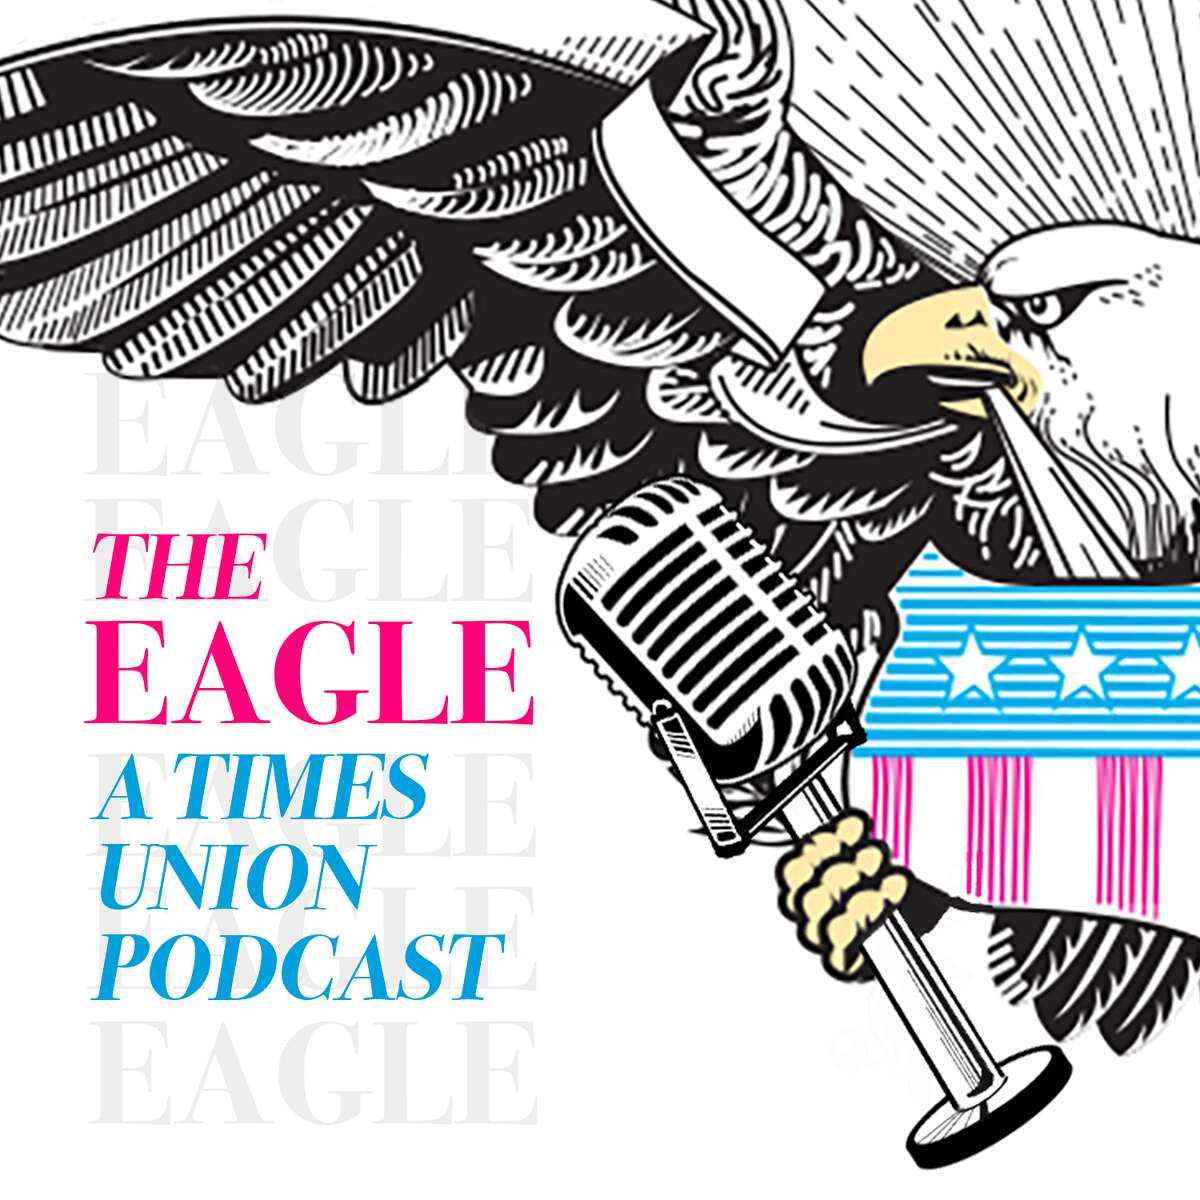 The Eagle, a Times Union podcast, is available on Apple Podcasts, Google Podcasts, Spotify and other popular podcast apps. Subscribe to get new episodes automatically delivered to your app. 